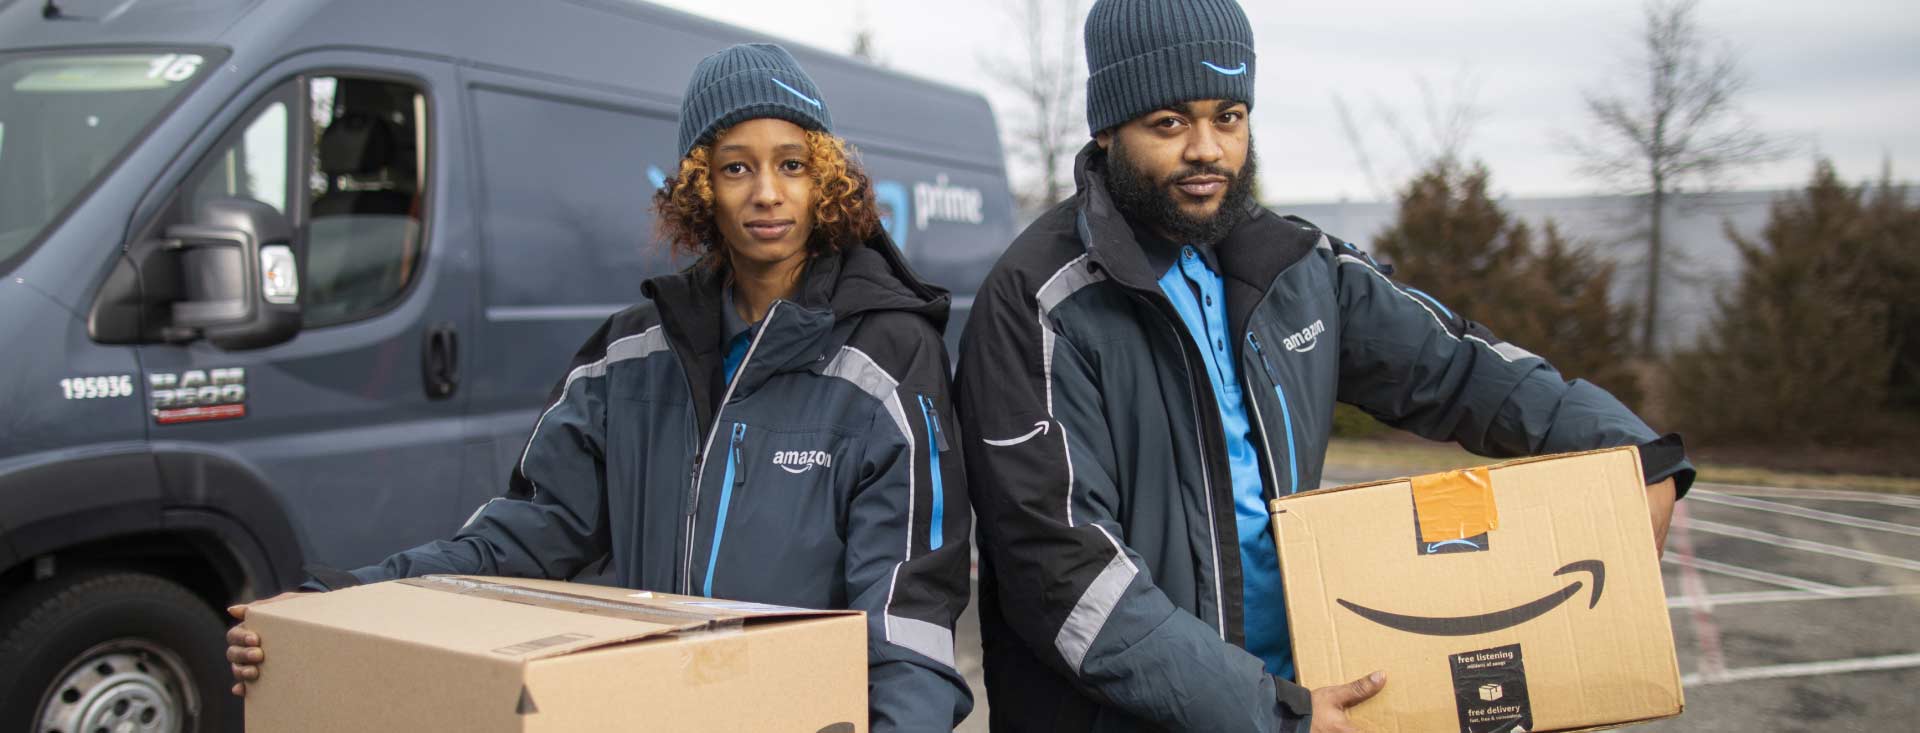 Two Amazon delivery people each holding Amazon boxes in front of delivery van.